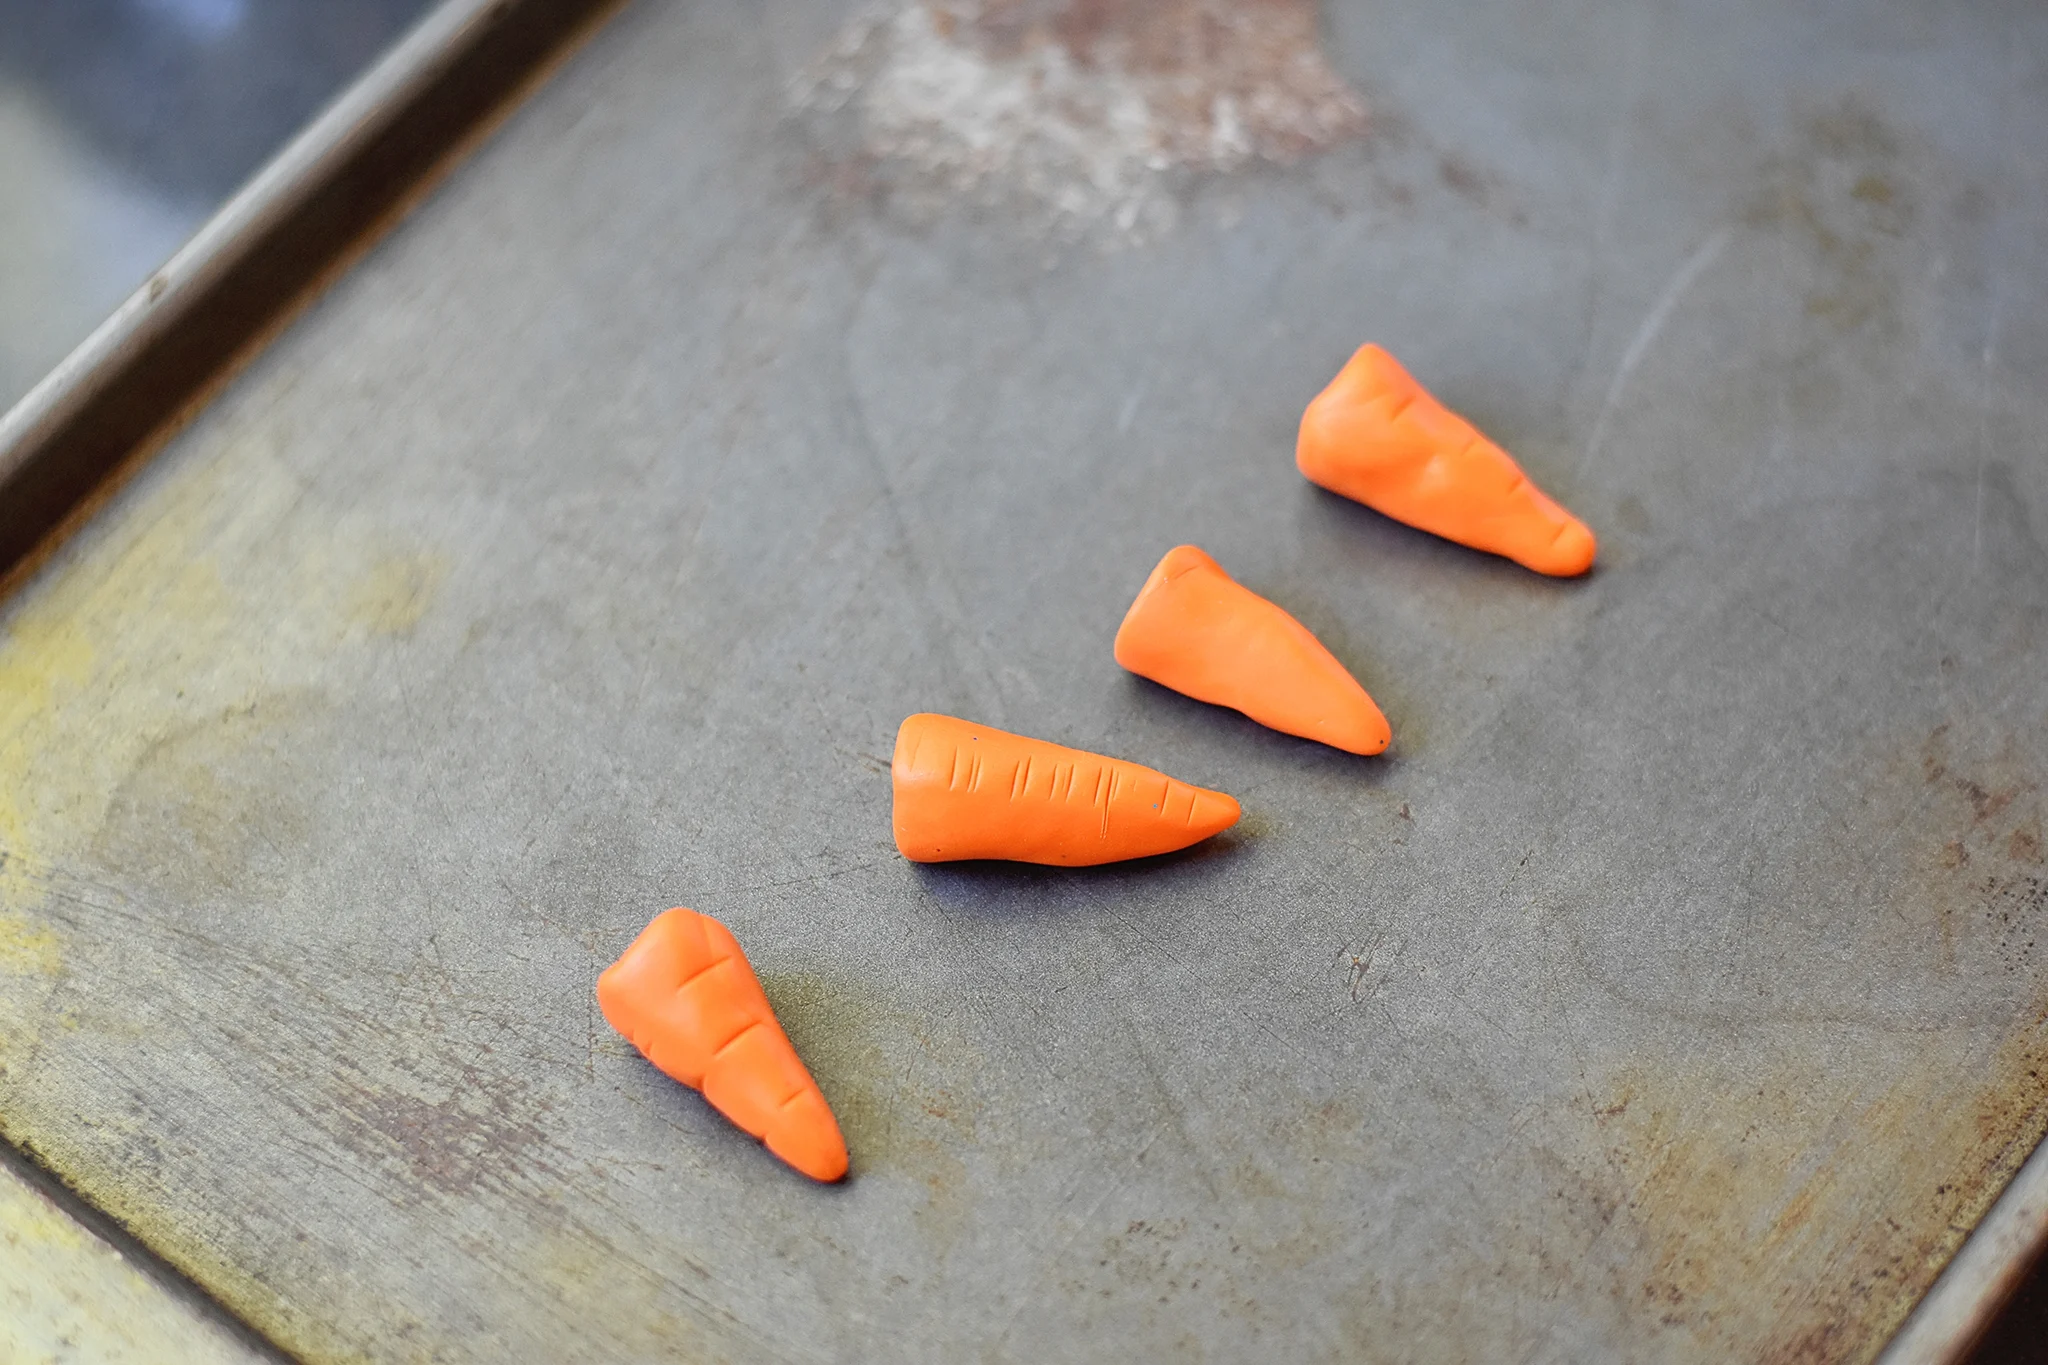 Bake your FIMO clay noses for 20 minutes until they harden!